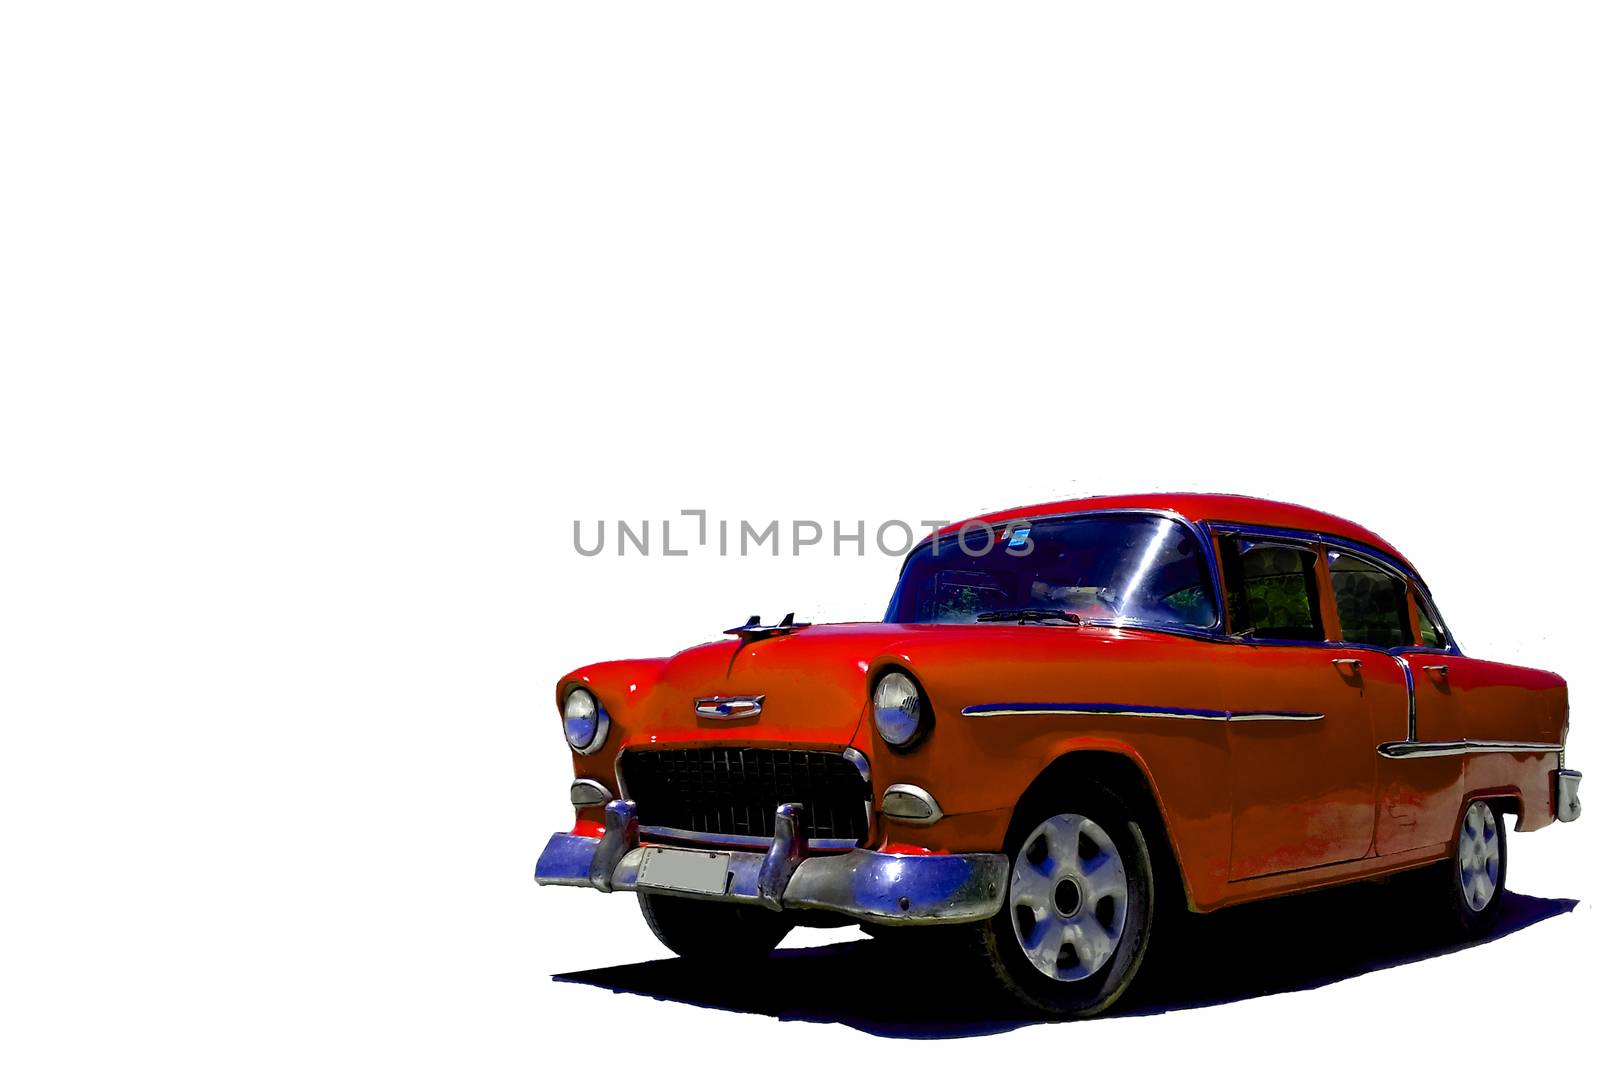 Red vintage American car on white background